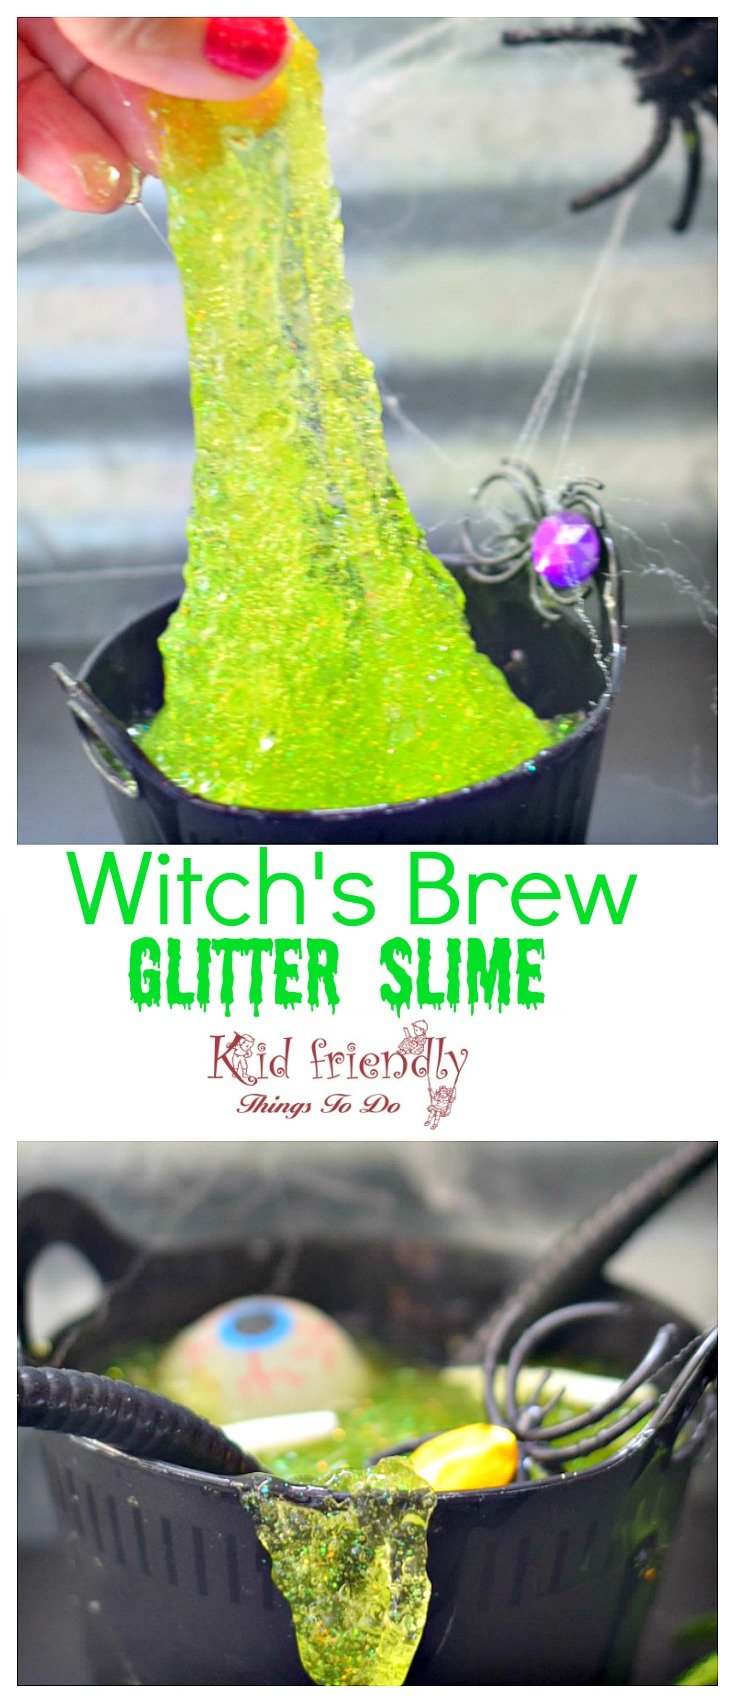 Witch's Brew Glitter Slime Recipe for a Fun Halloween Activity with Kids and Teenagers - fun craft and a great party gift - www.kidfriendlythingstodo.com